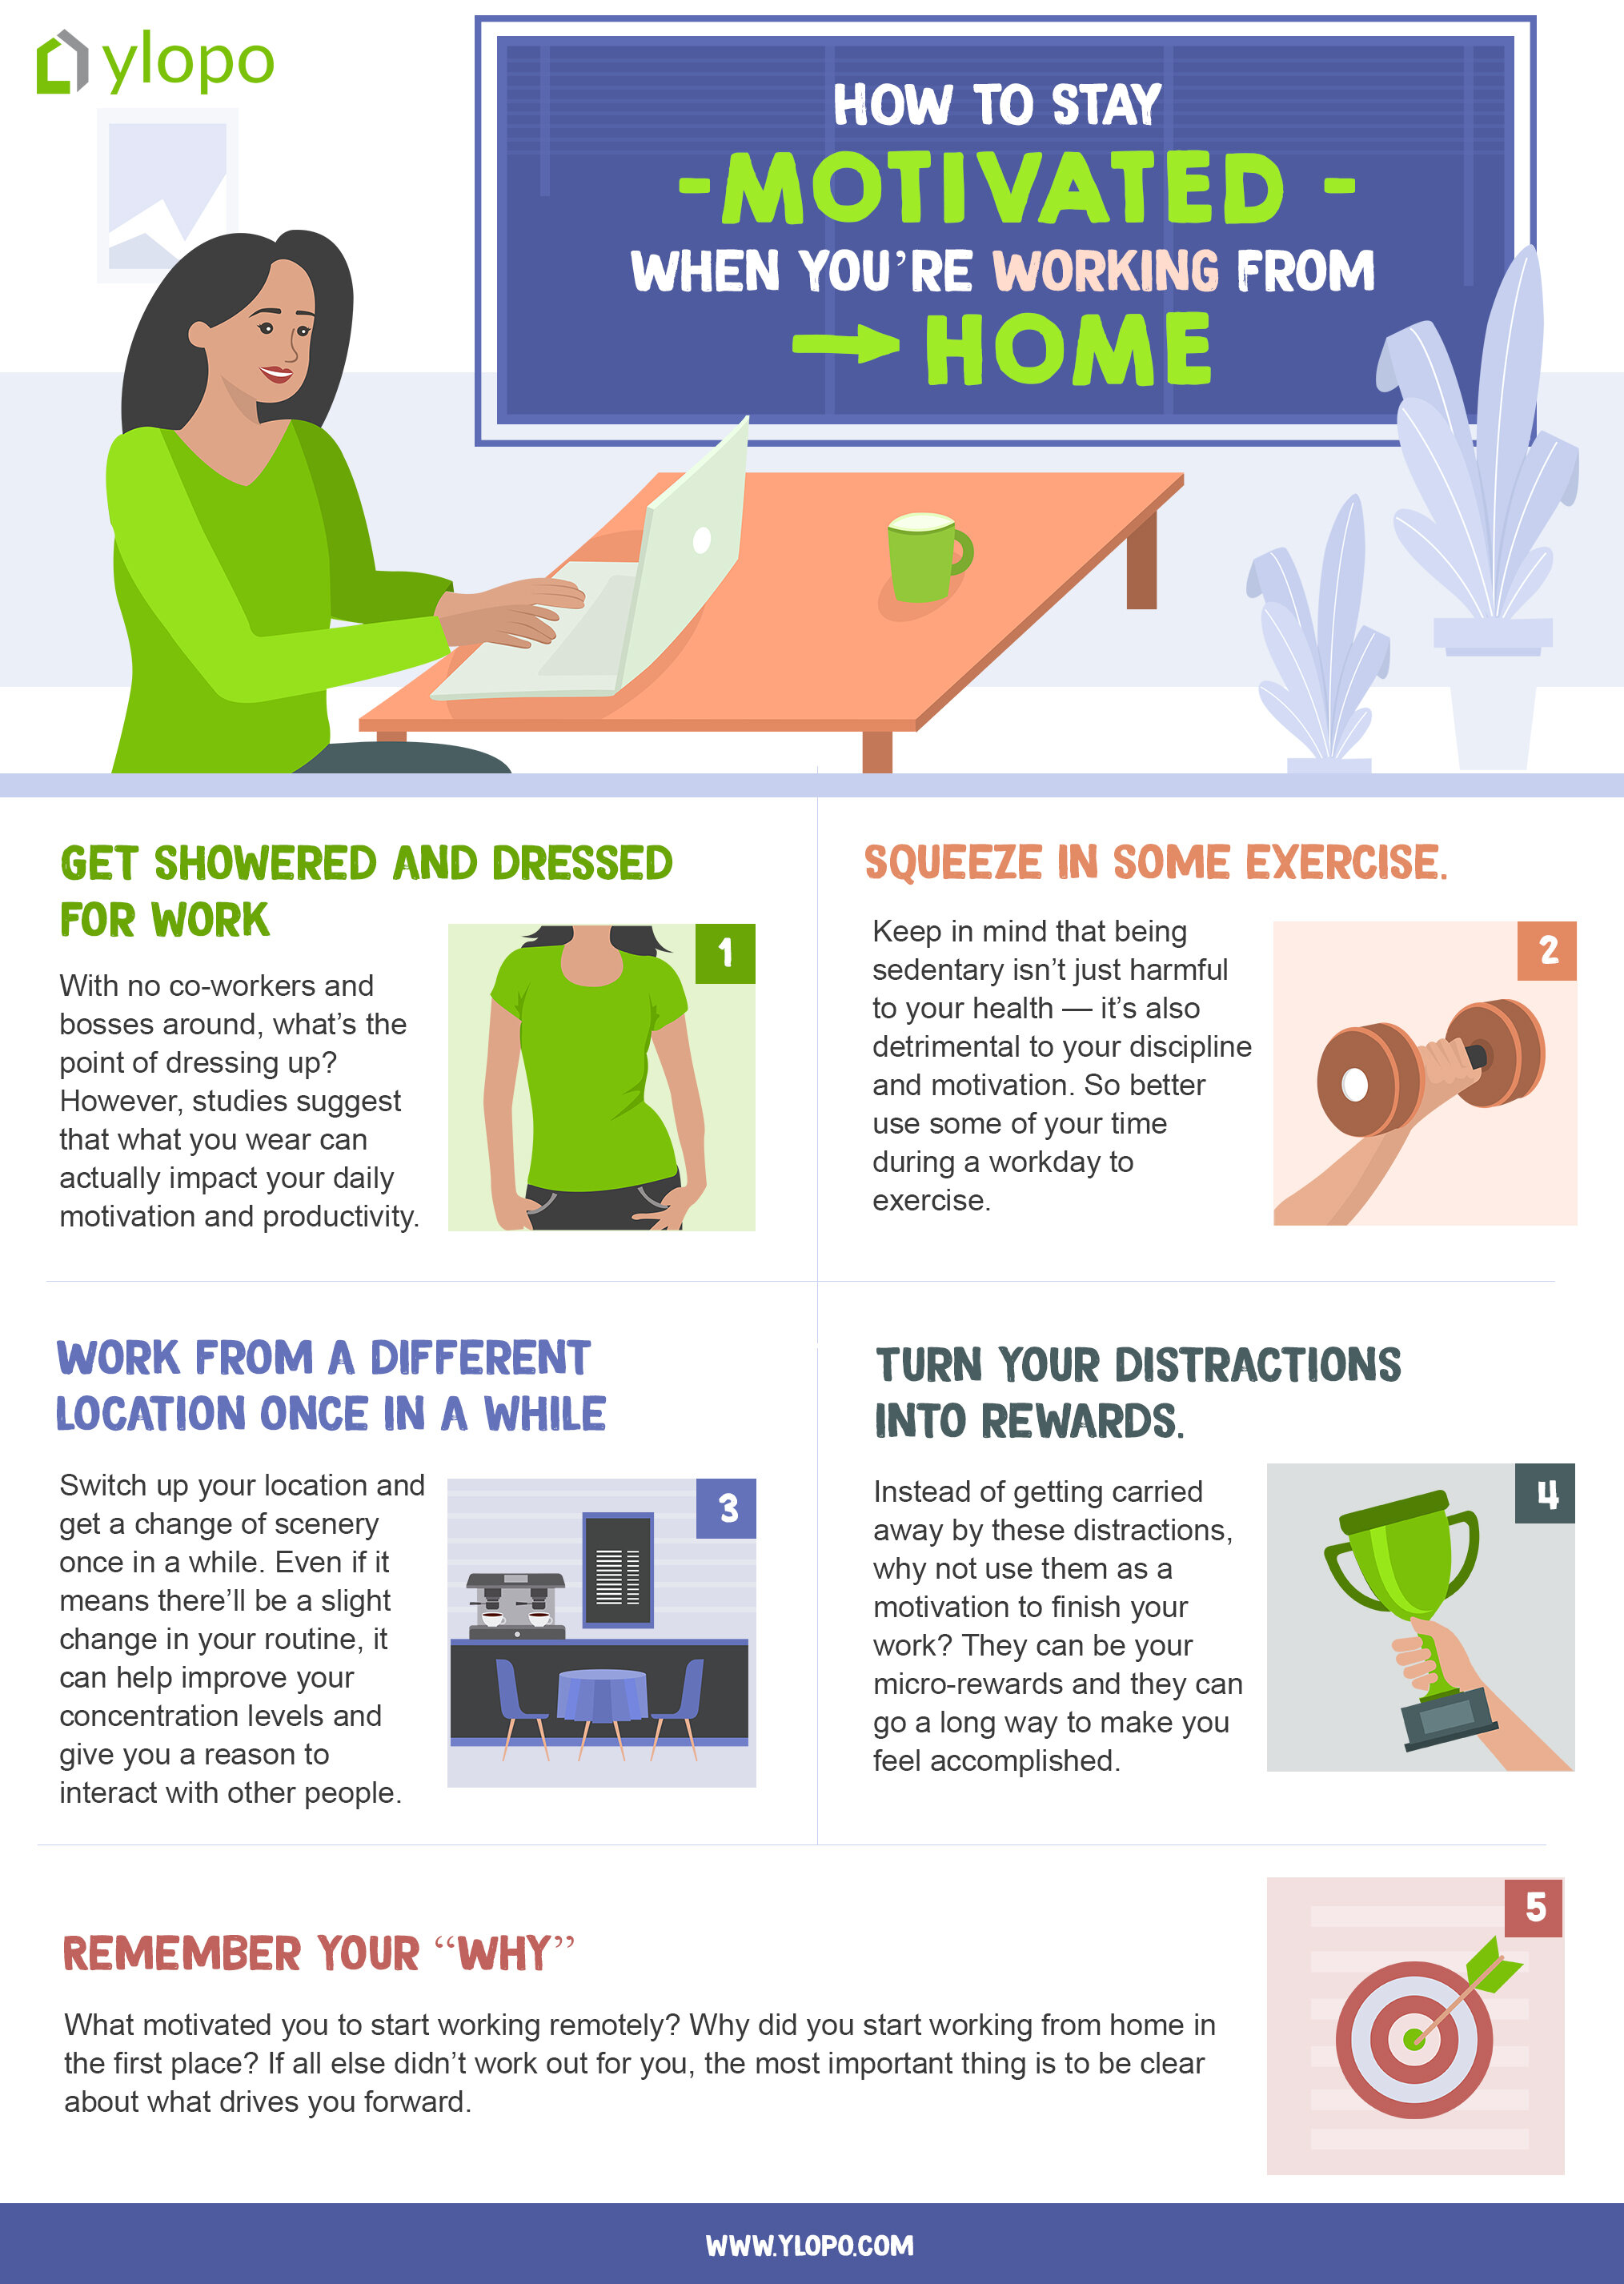 How to Actually WorkWhen You're Working from Home 